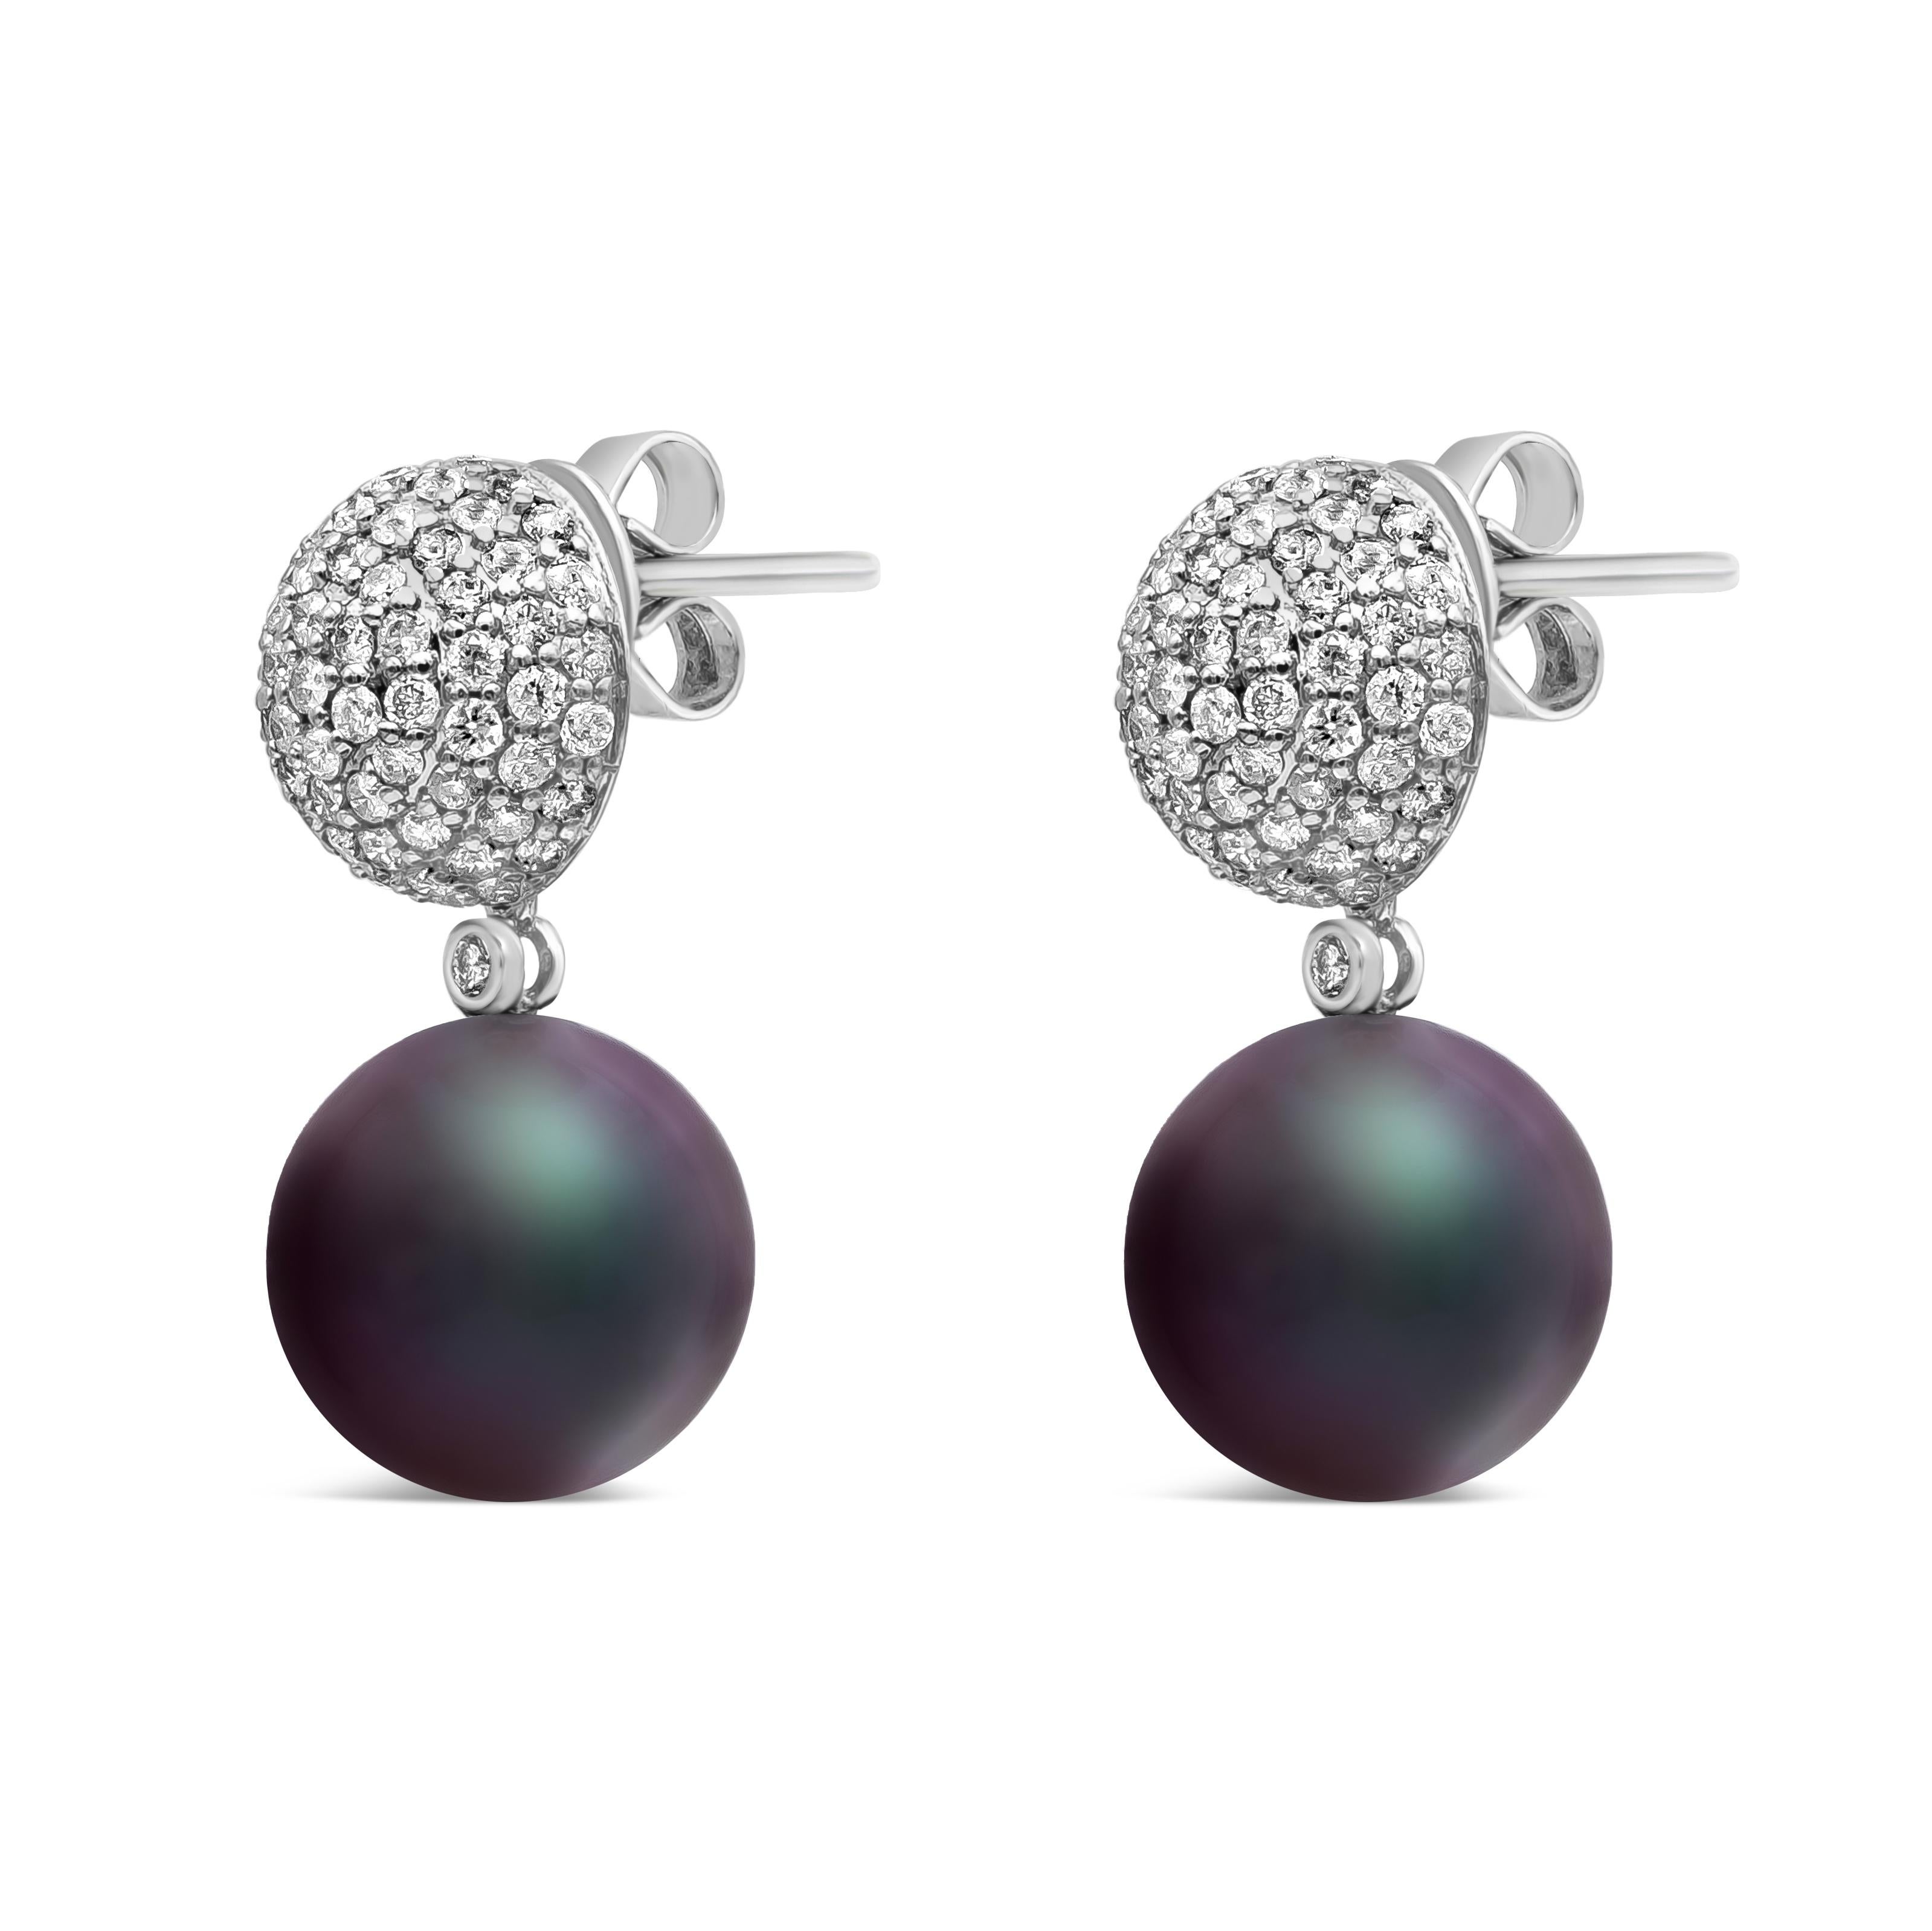 A classic style dangle earrings showcasing 12-13 mm black Tahitian pearls. This earrings has 142 round cut diamonds weighing 1.56 carats total. Suspended on a diamond encrusted ball made in 18K White Gold.

Roman Malakov is a custom house,